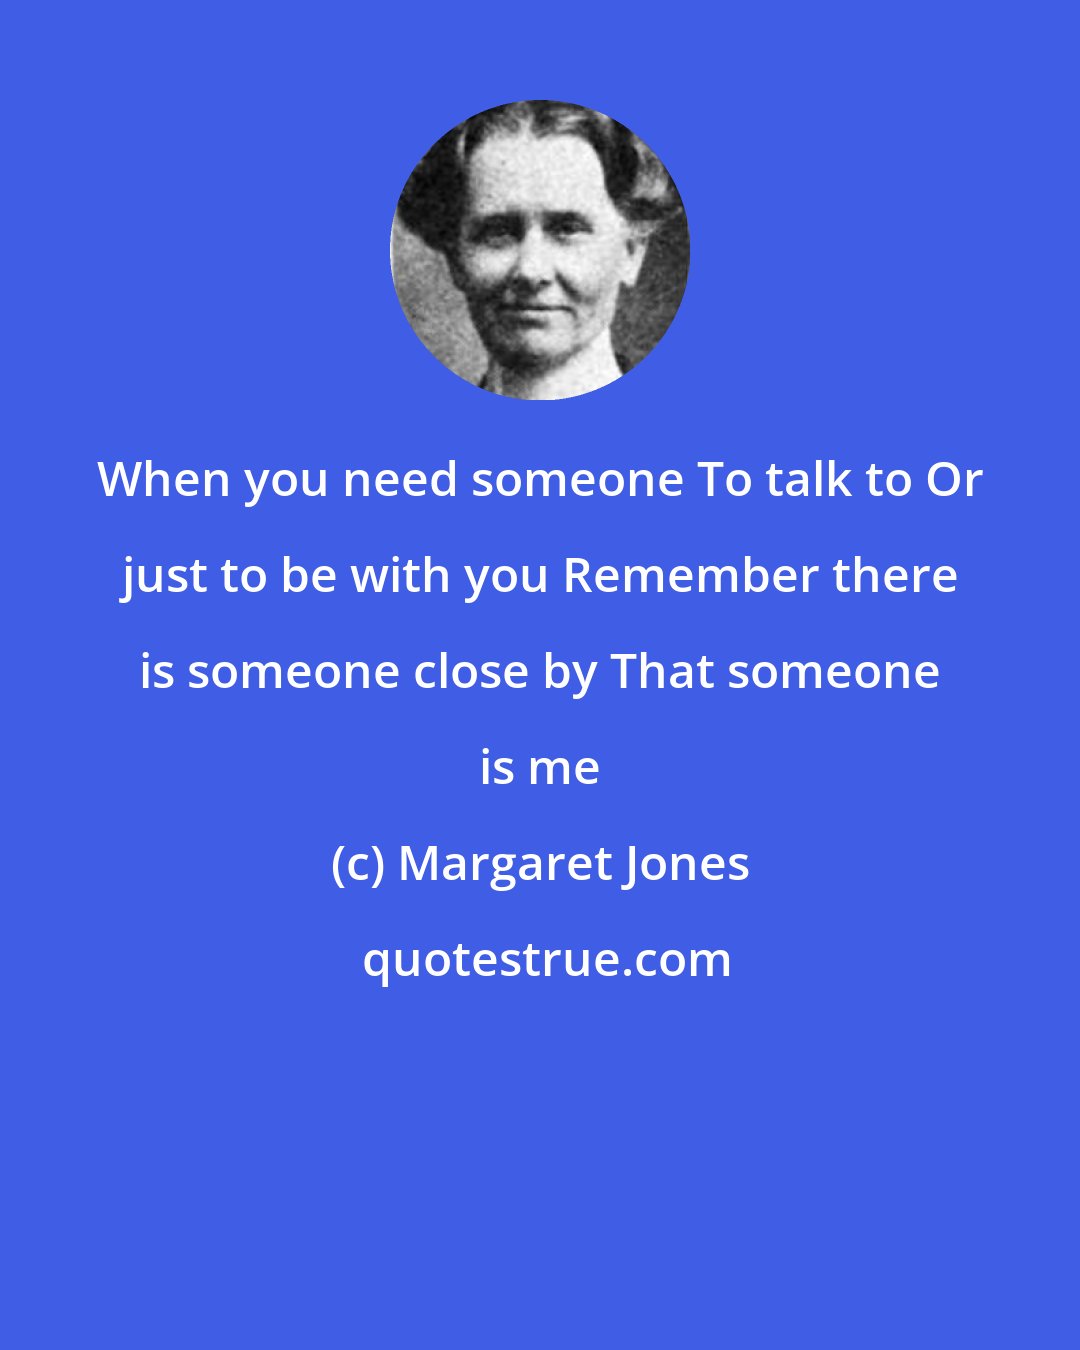 Margaret Jones: When you need someone To talk to Or just to be with you Remember there is someone close by That someone is me